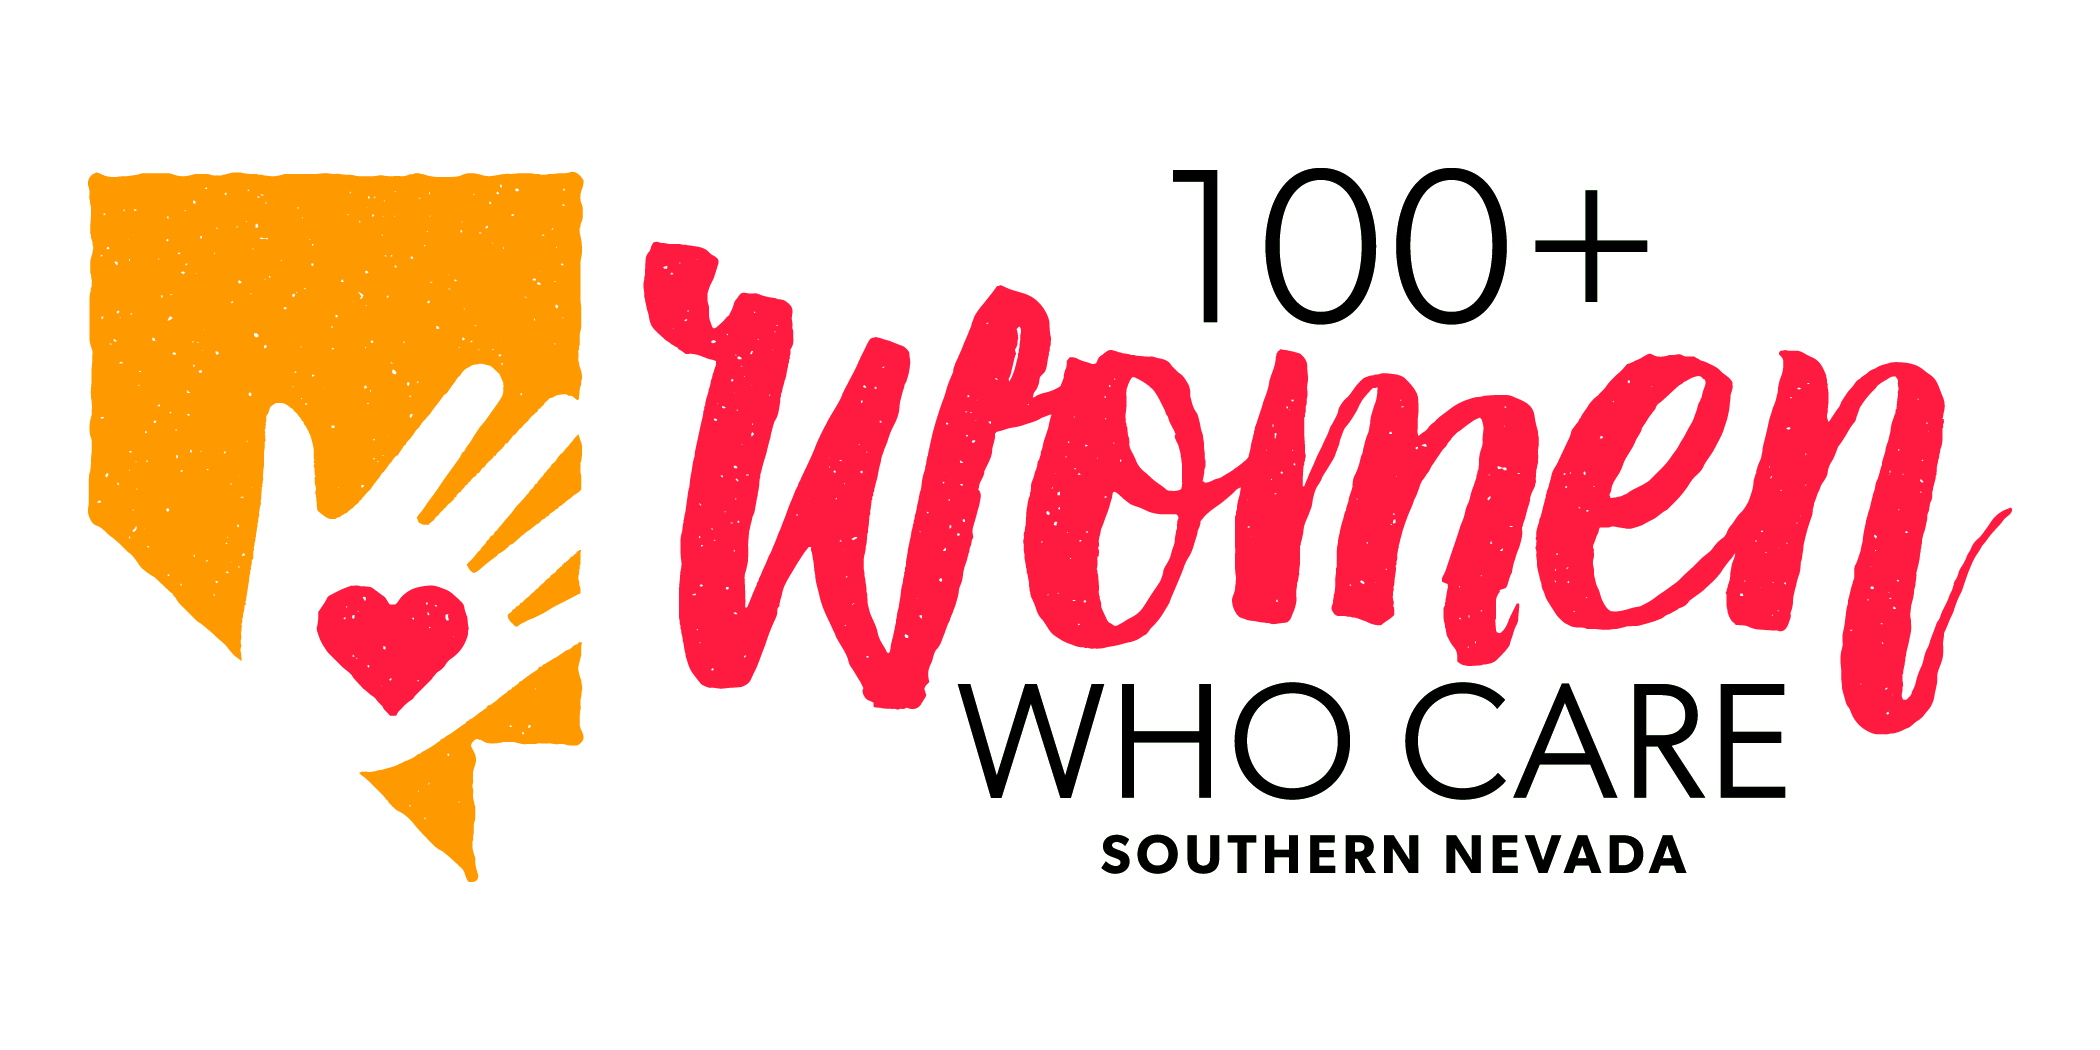 100+ Women Who Care, Southern Nevada